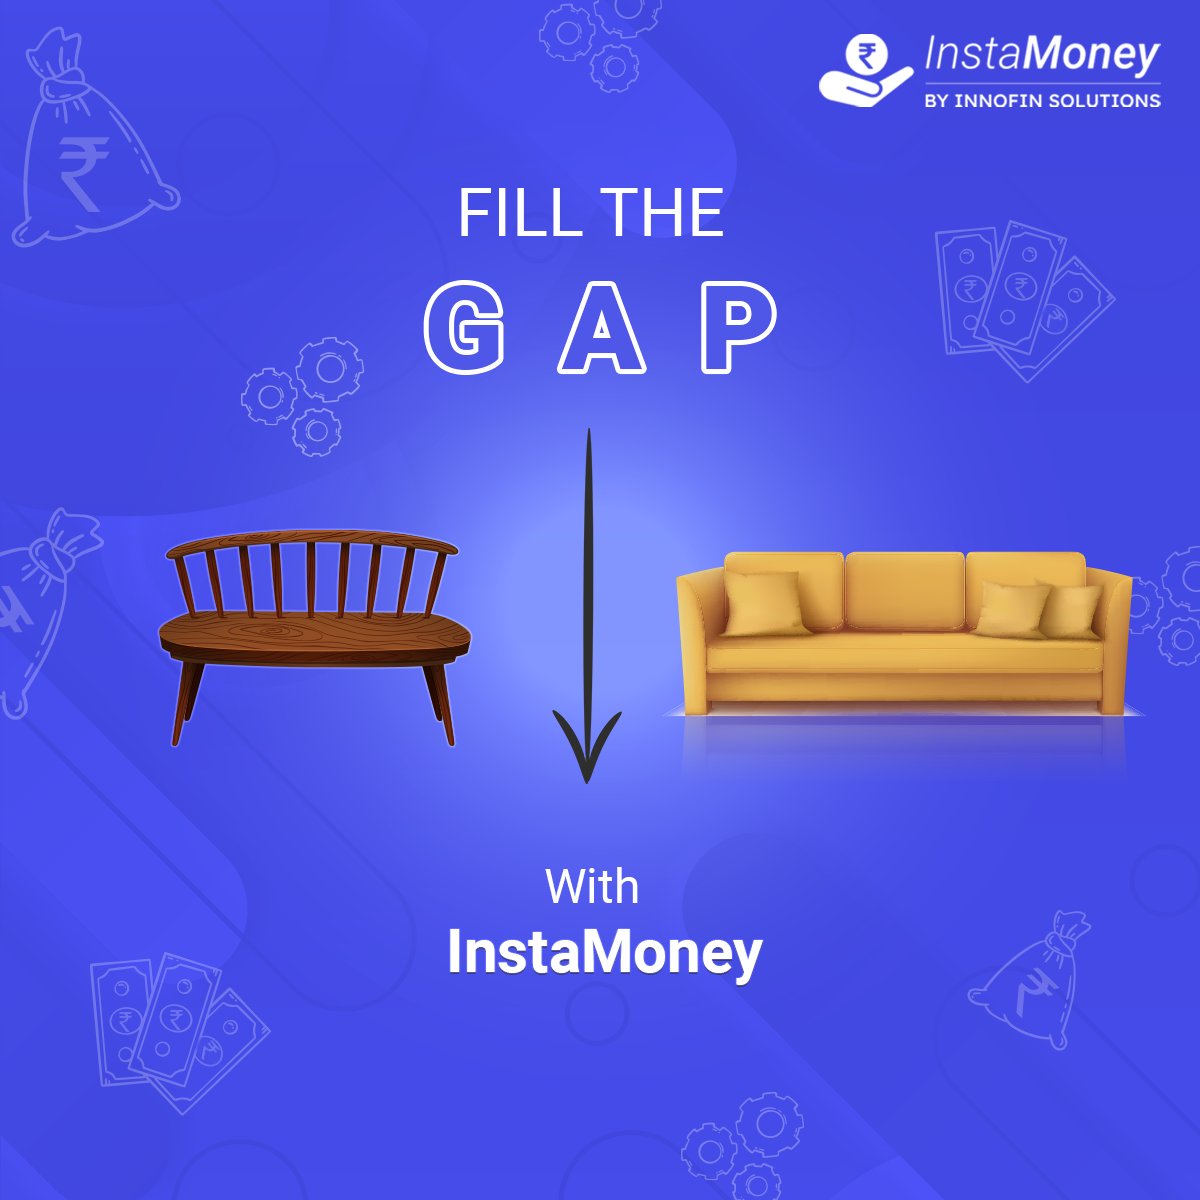 We're here to support your ever-evolving lifestyle. Trust us to bridge the financial gap for your comfy purchases.

#InstaMoney #LiveYourLife #QuickLoans #FillTheGap #FinancialFreedom #InstantLoans #Fintech #LoanApp #PersonalLoan #InstantCash